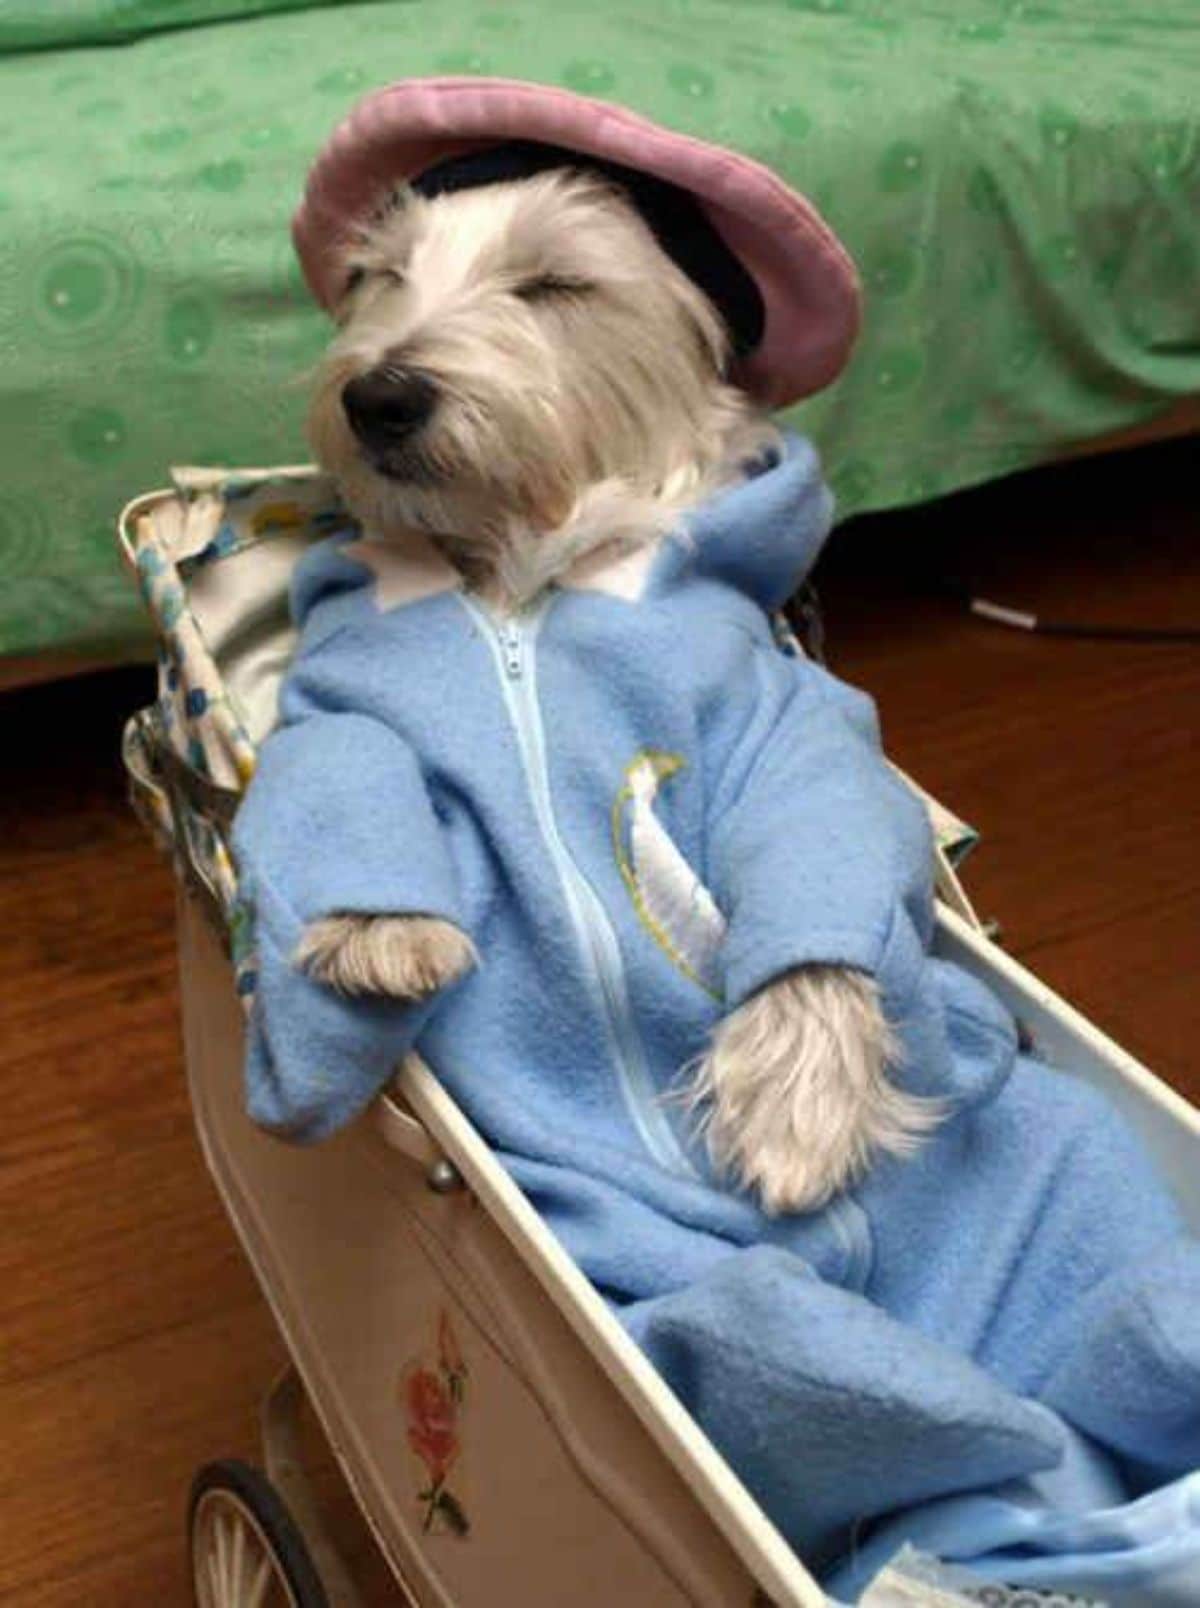 fluffy brown and white dog in a blue onesie and a red hat sitting on a chair